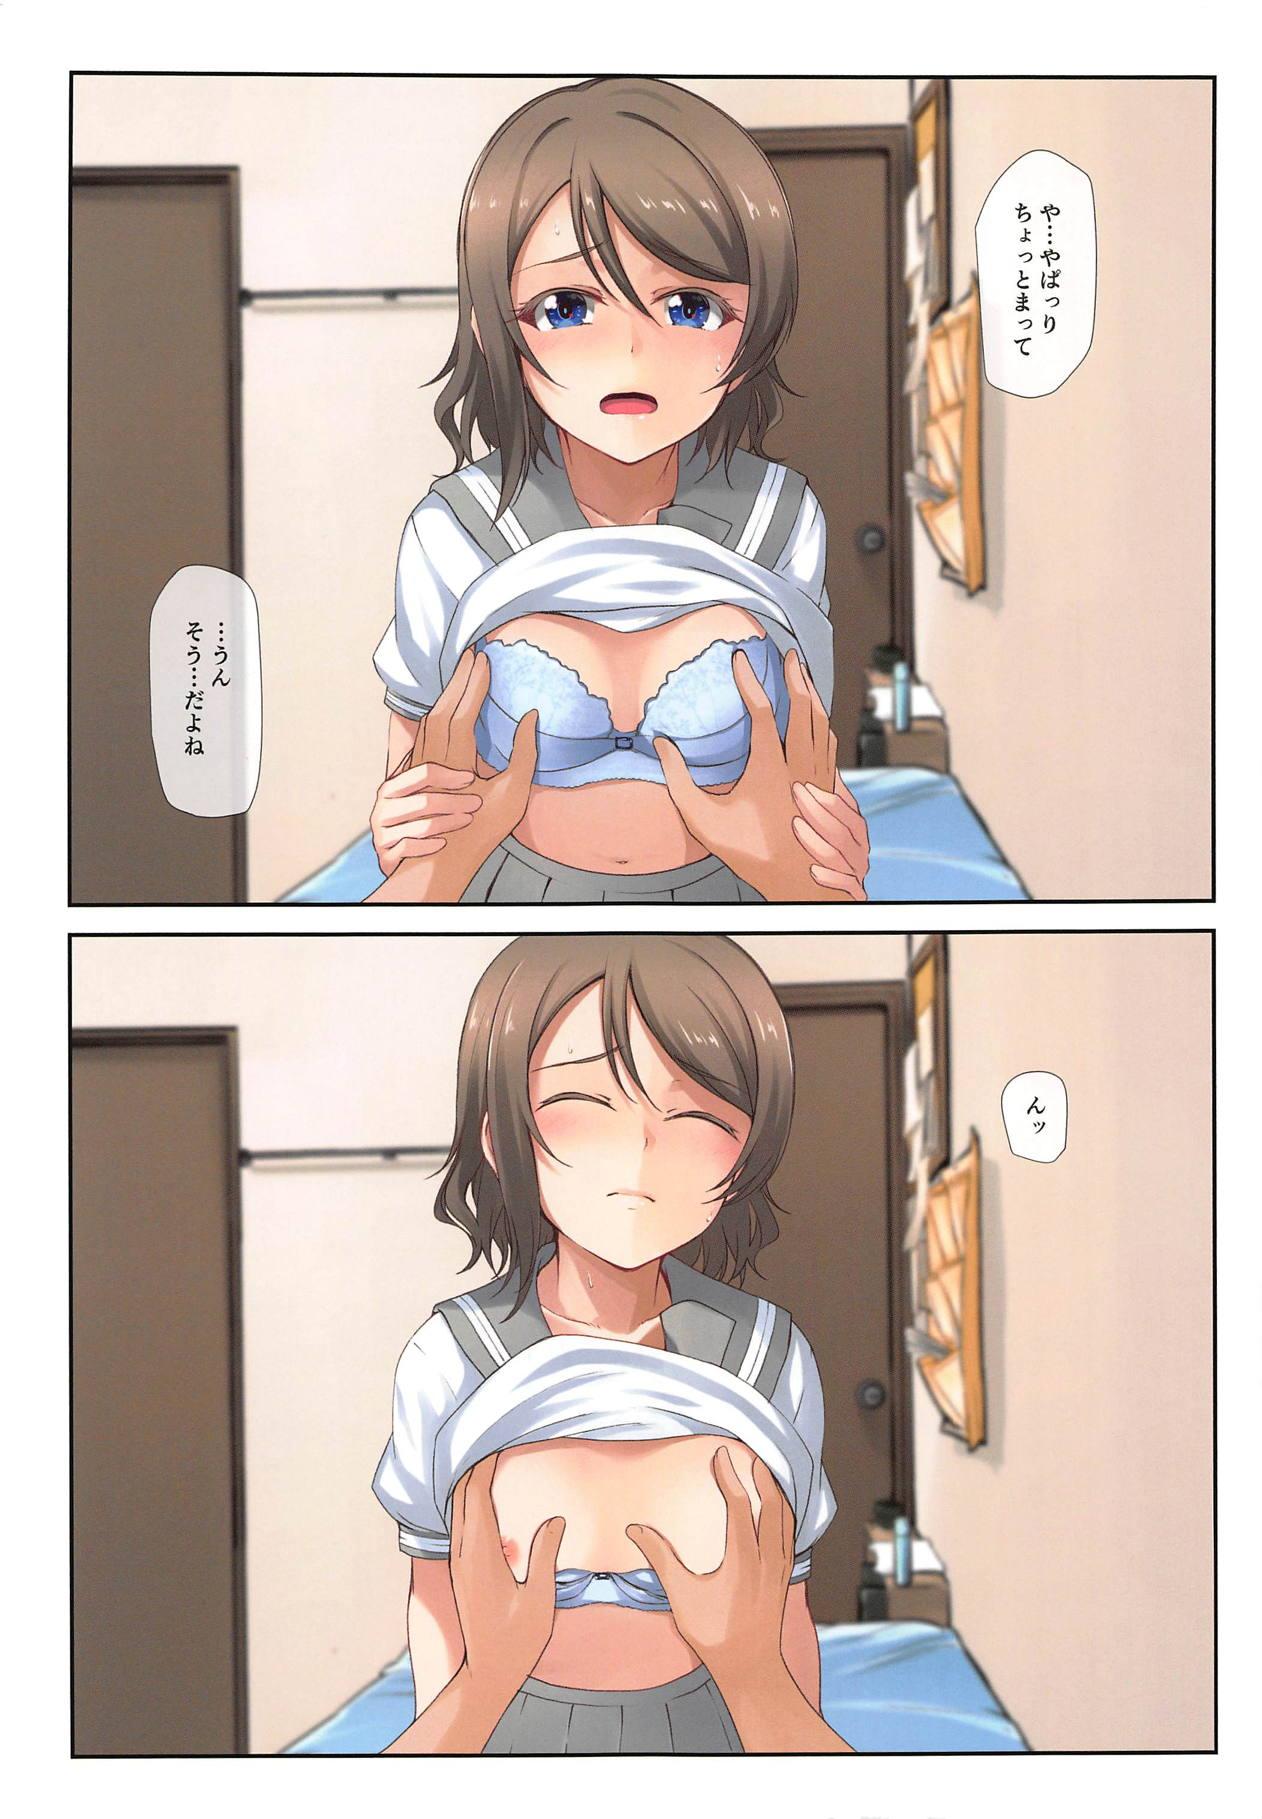 Ball Busting Youbi - Love live sunshine Underwear - Page 7